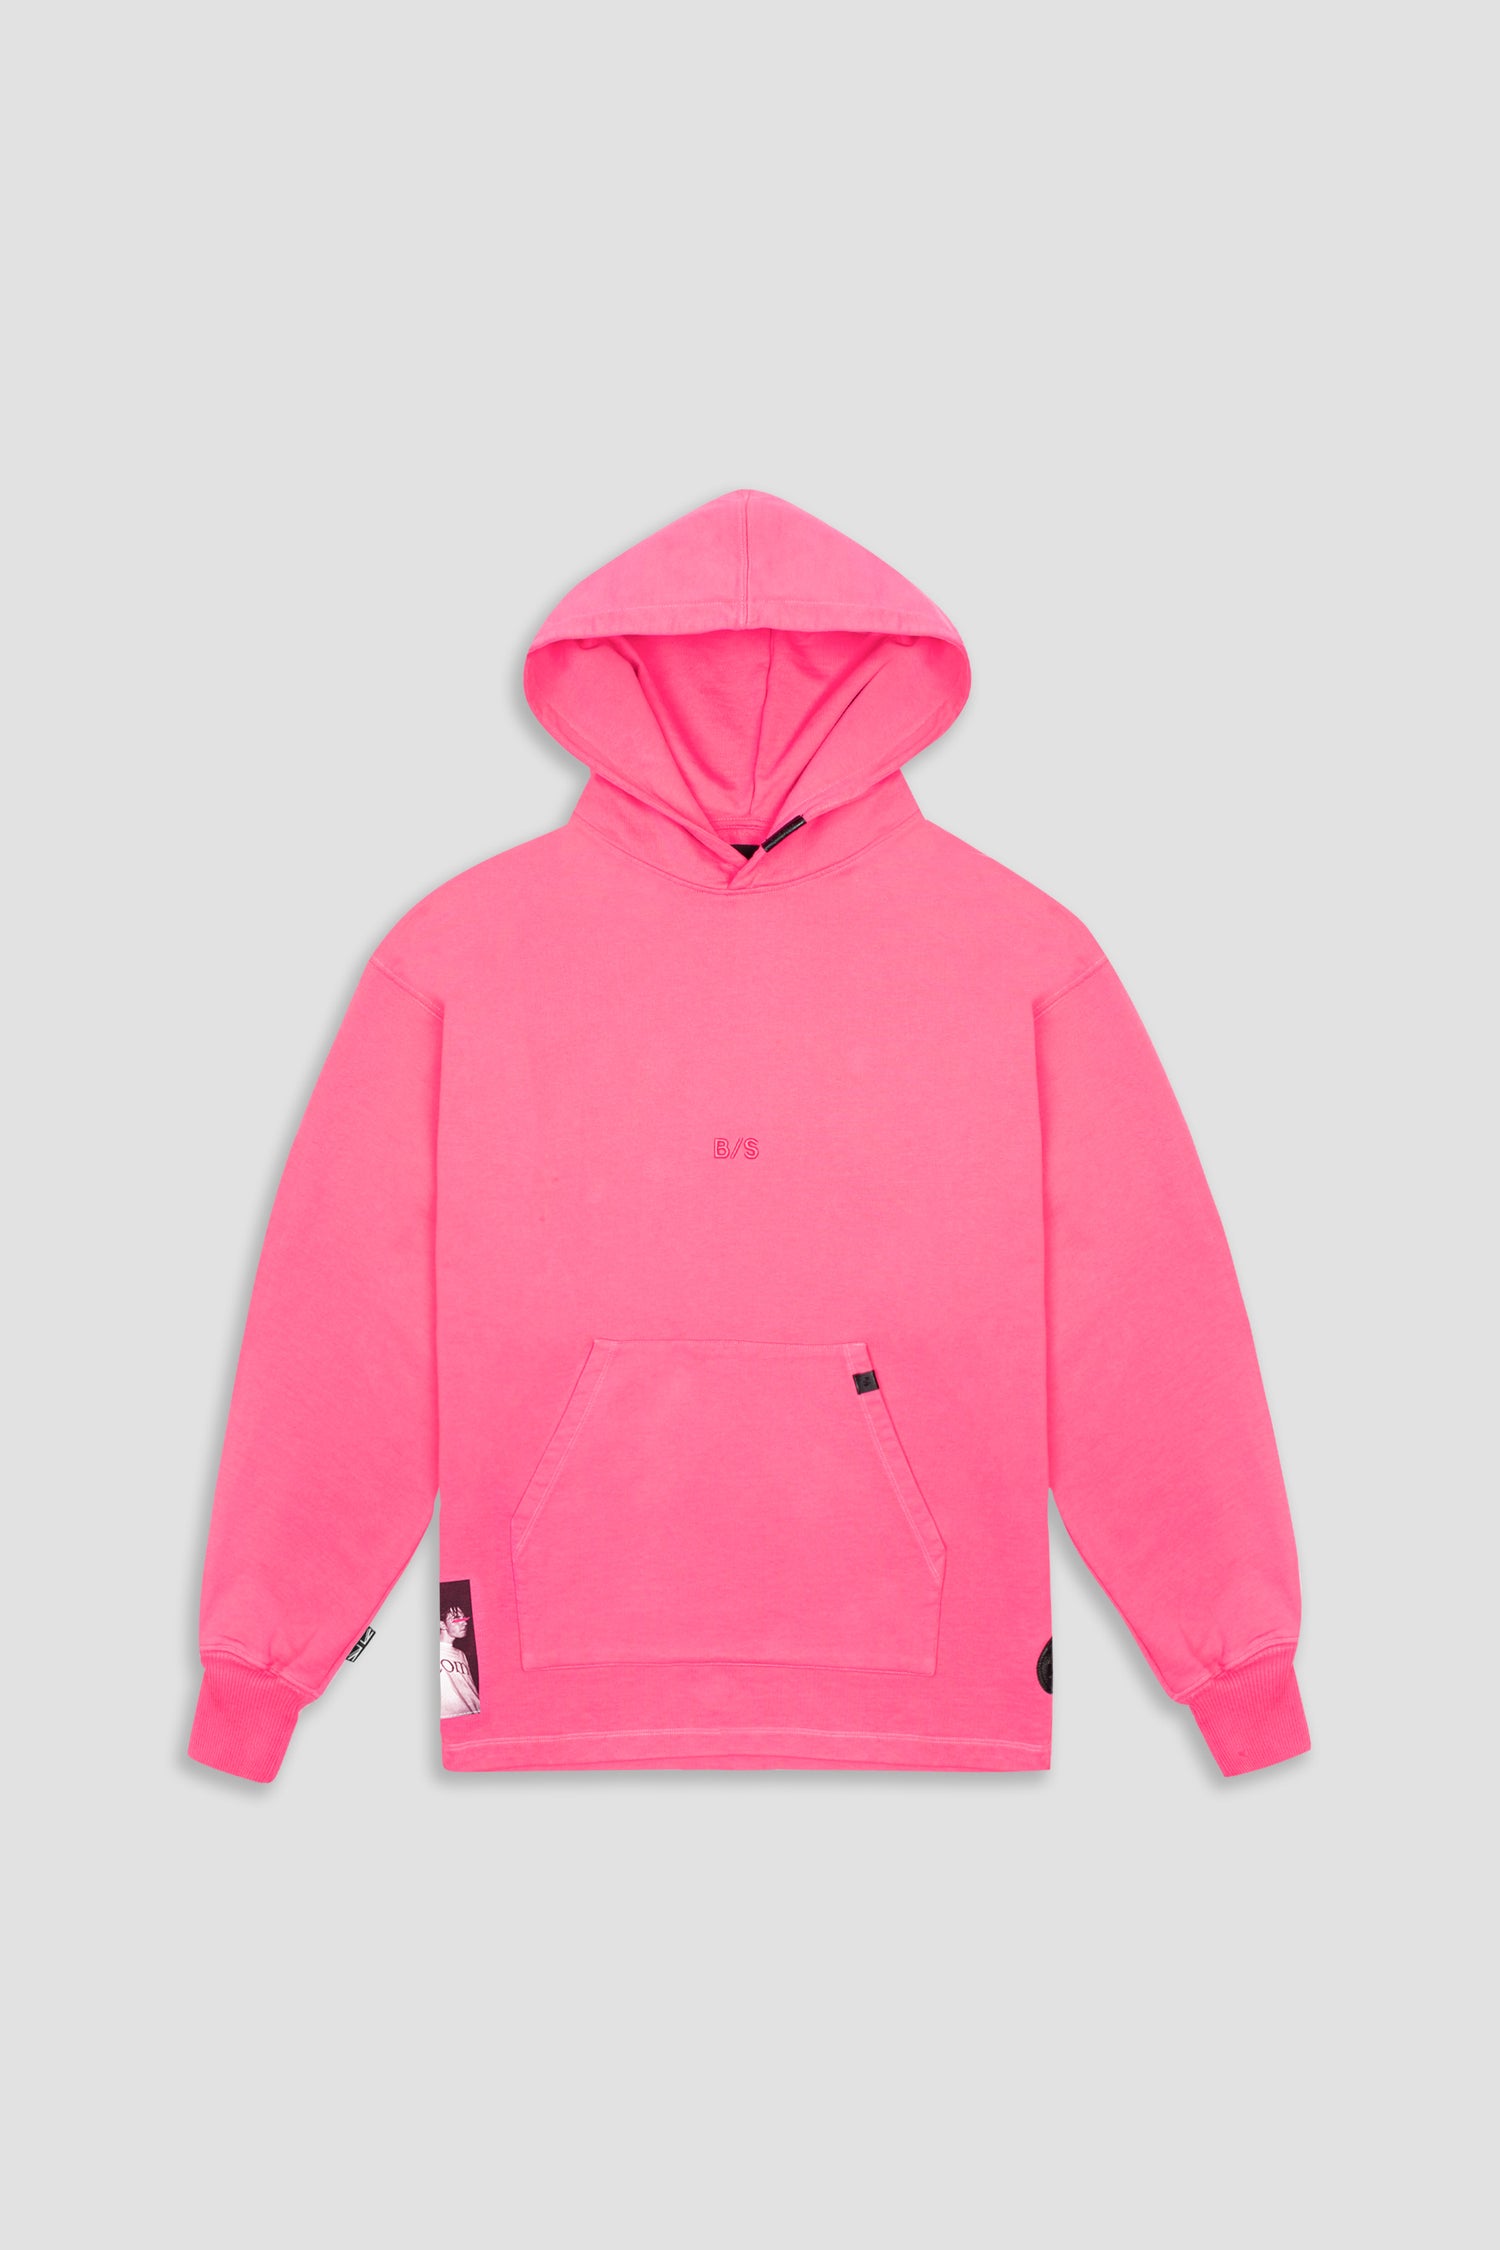 HOODIE MAN - By Price: Lowest to Highest